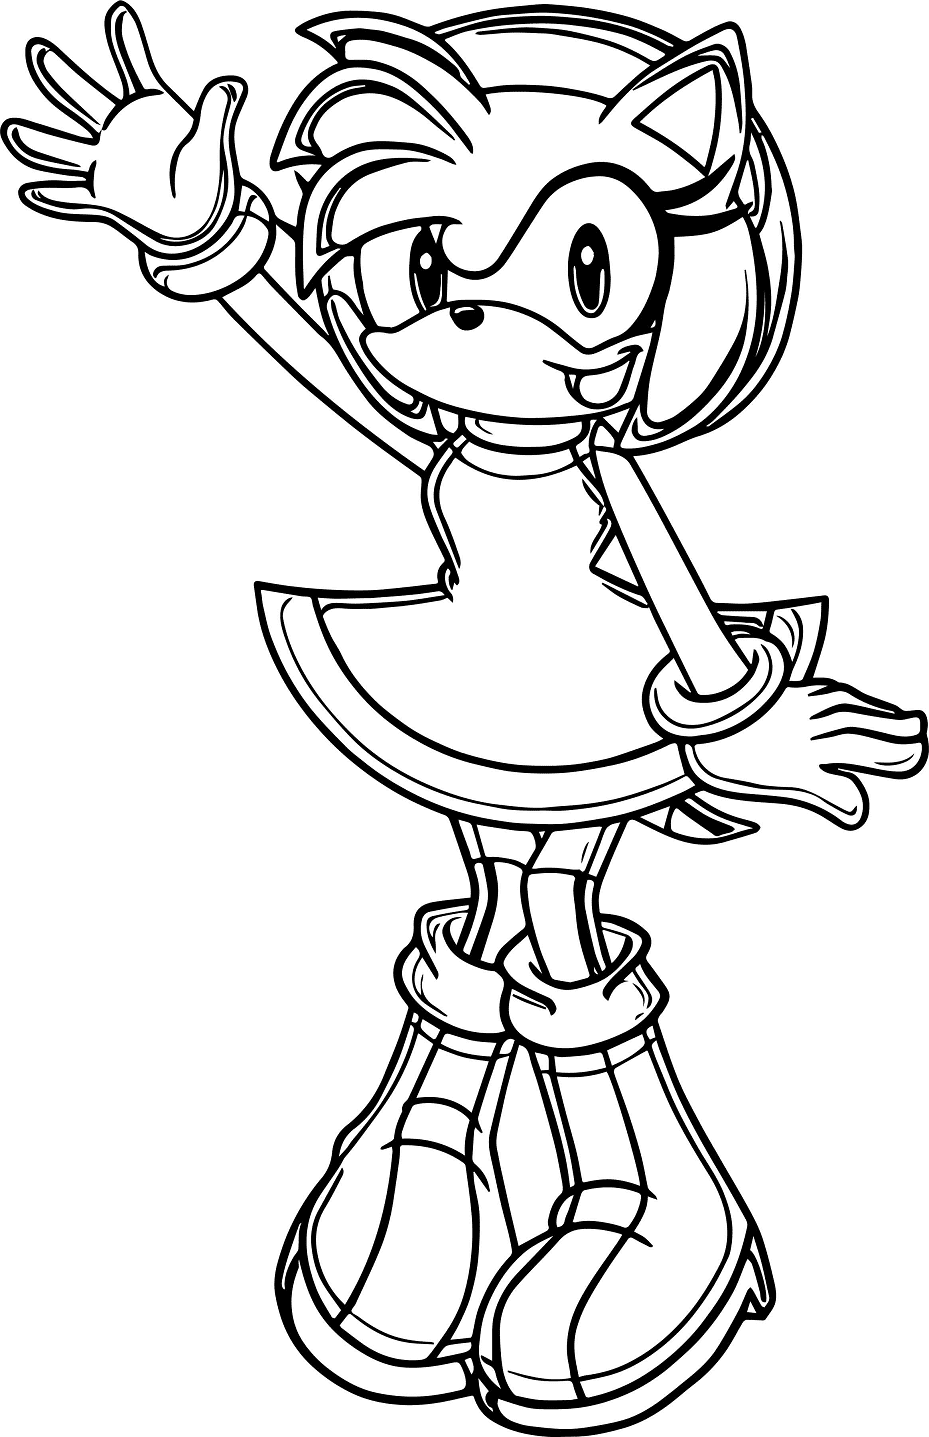 Amy Rose Hi Coloring Page